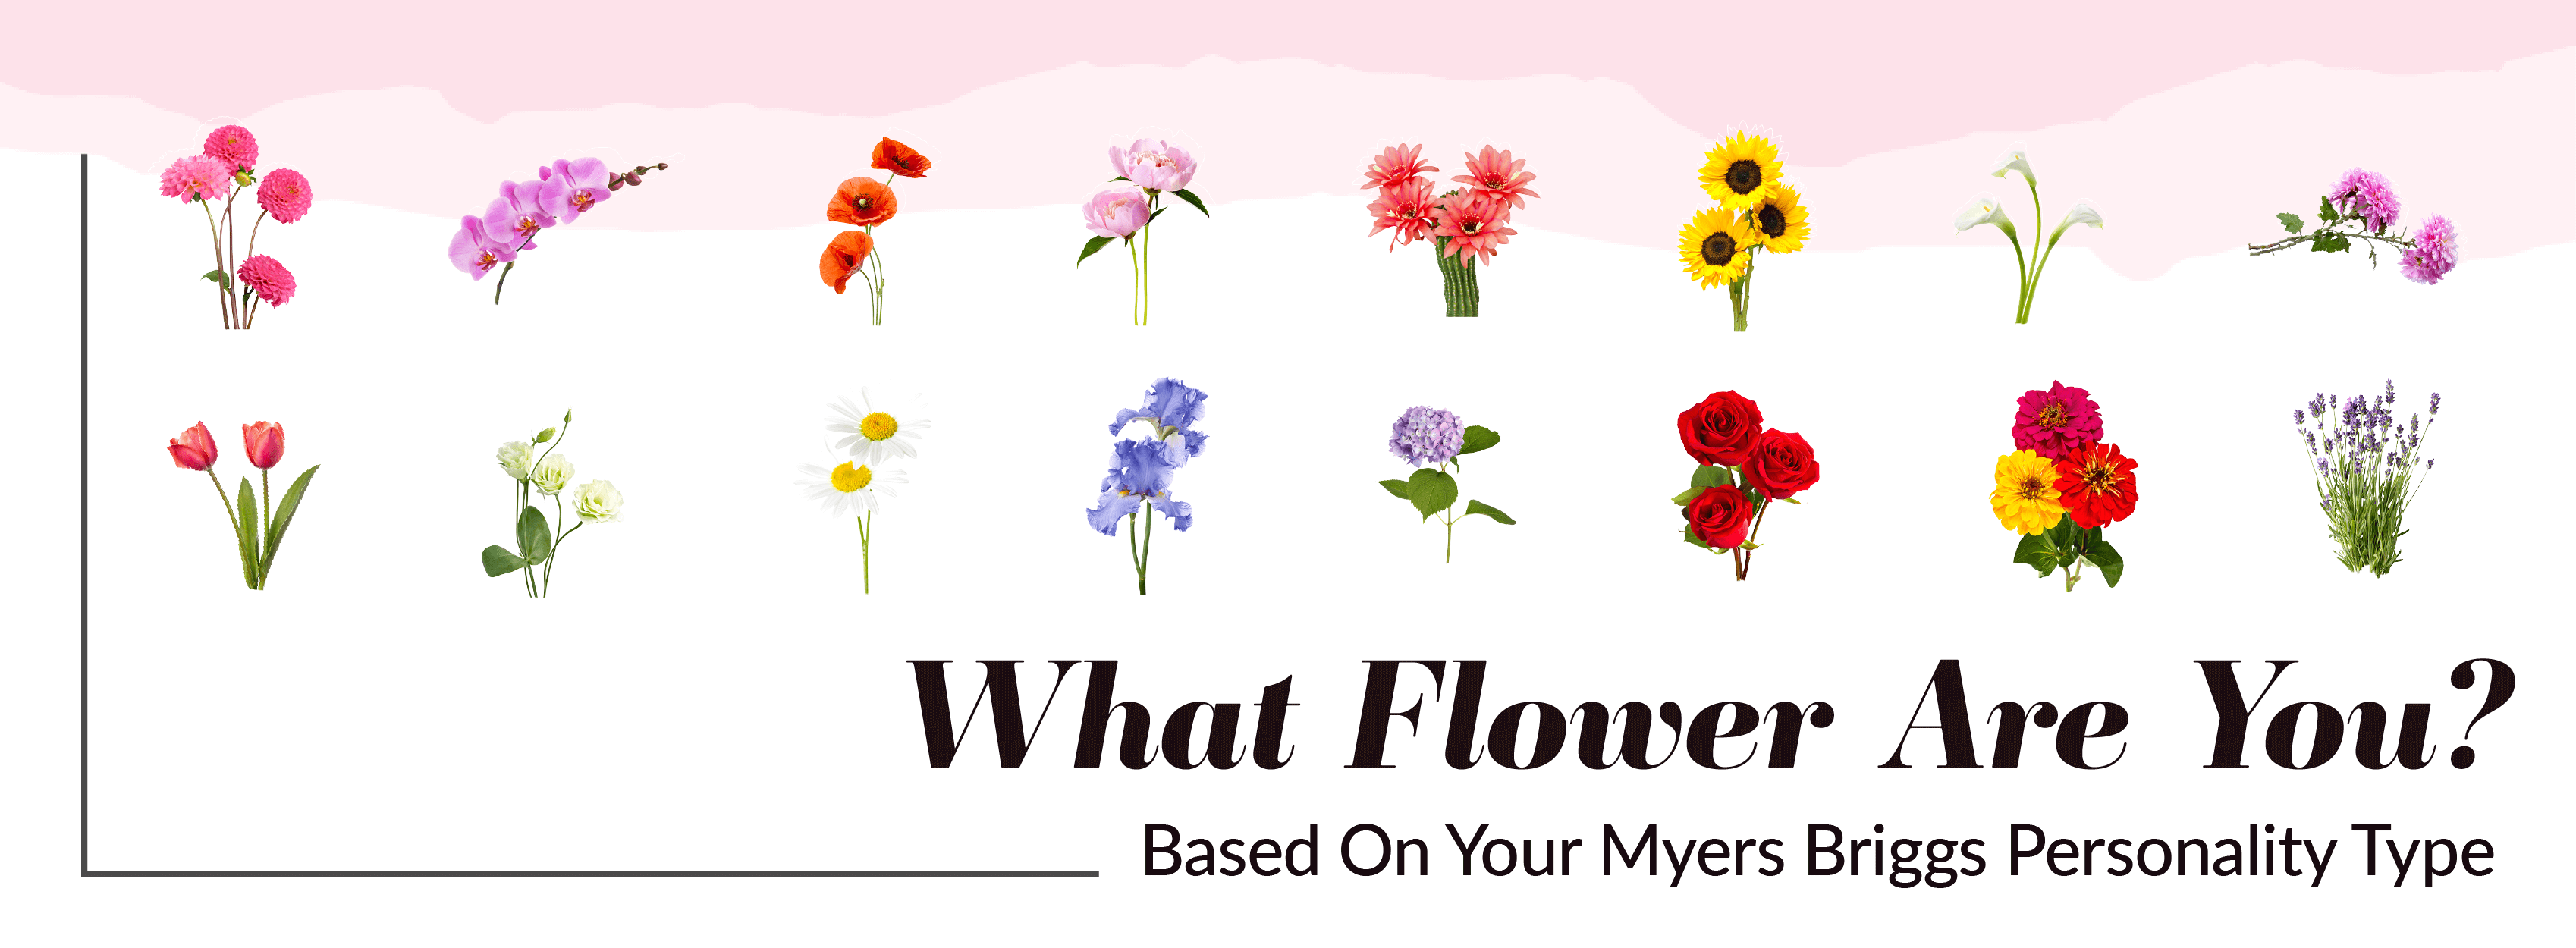 What flower are you